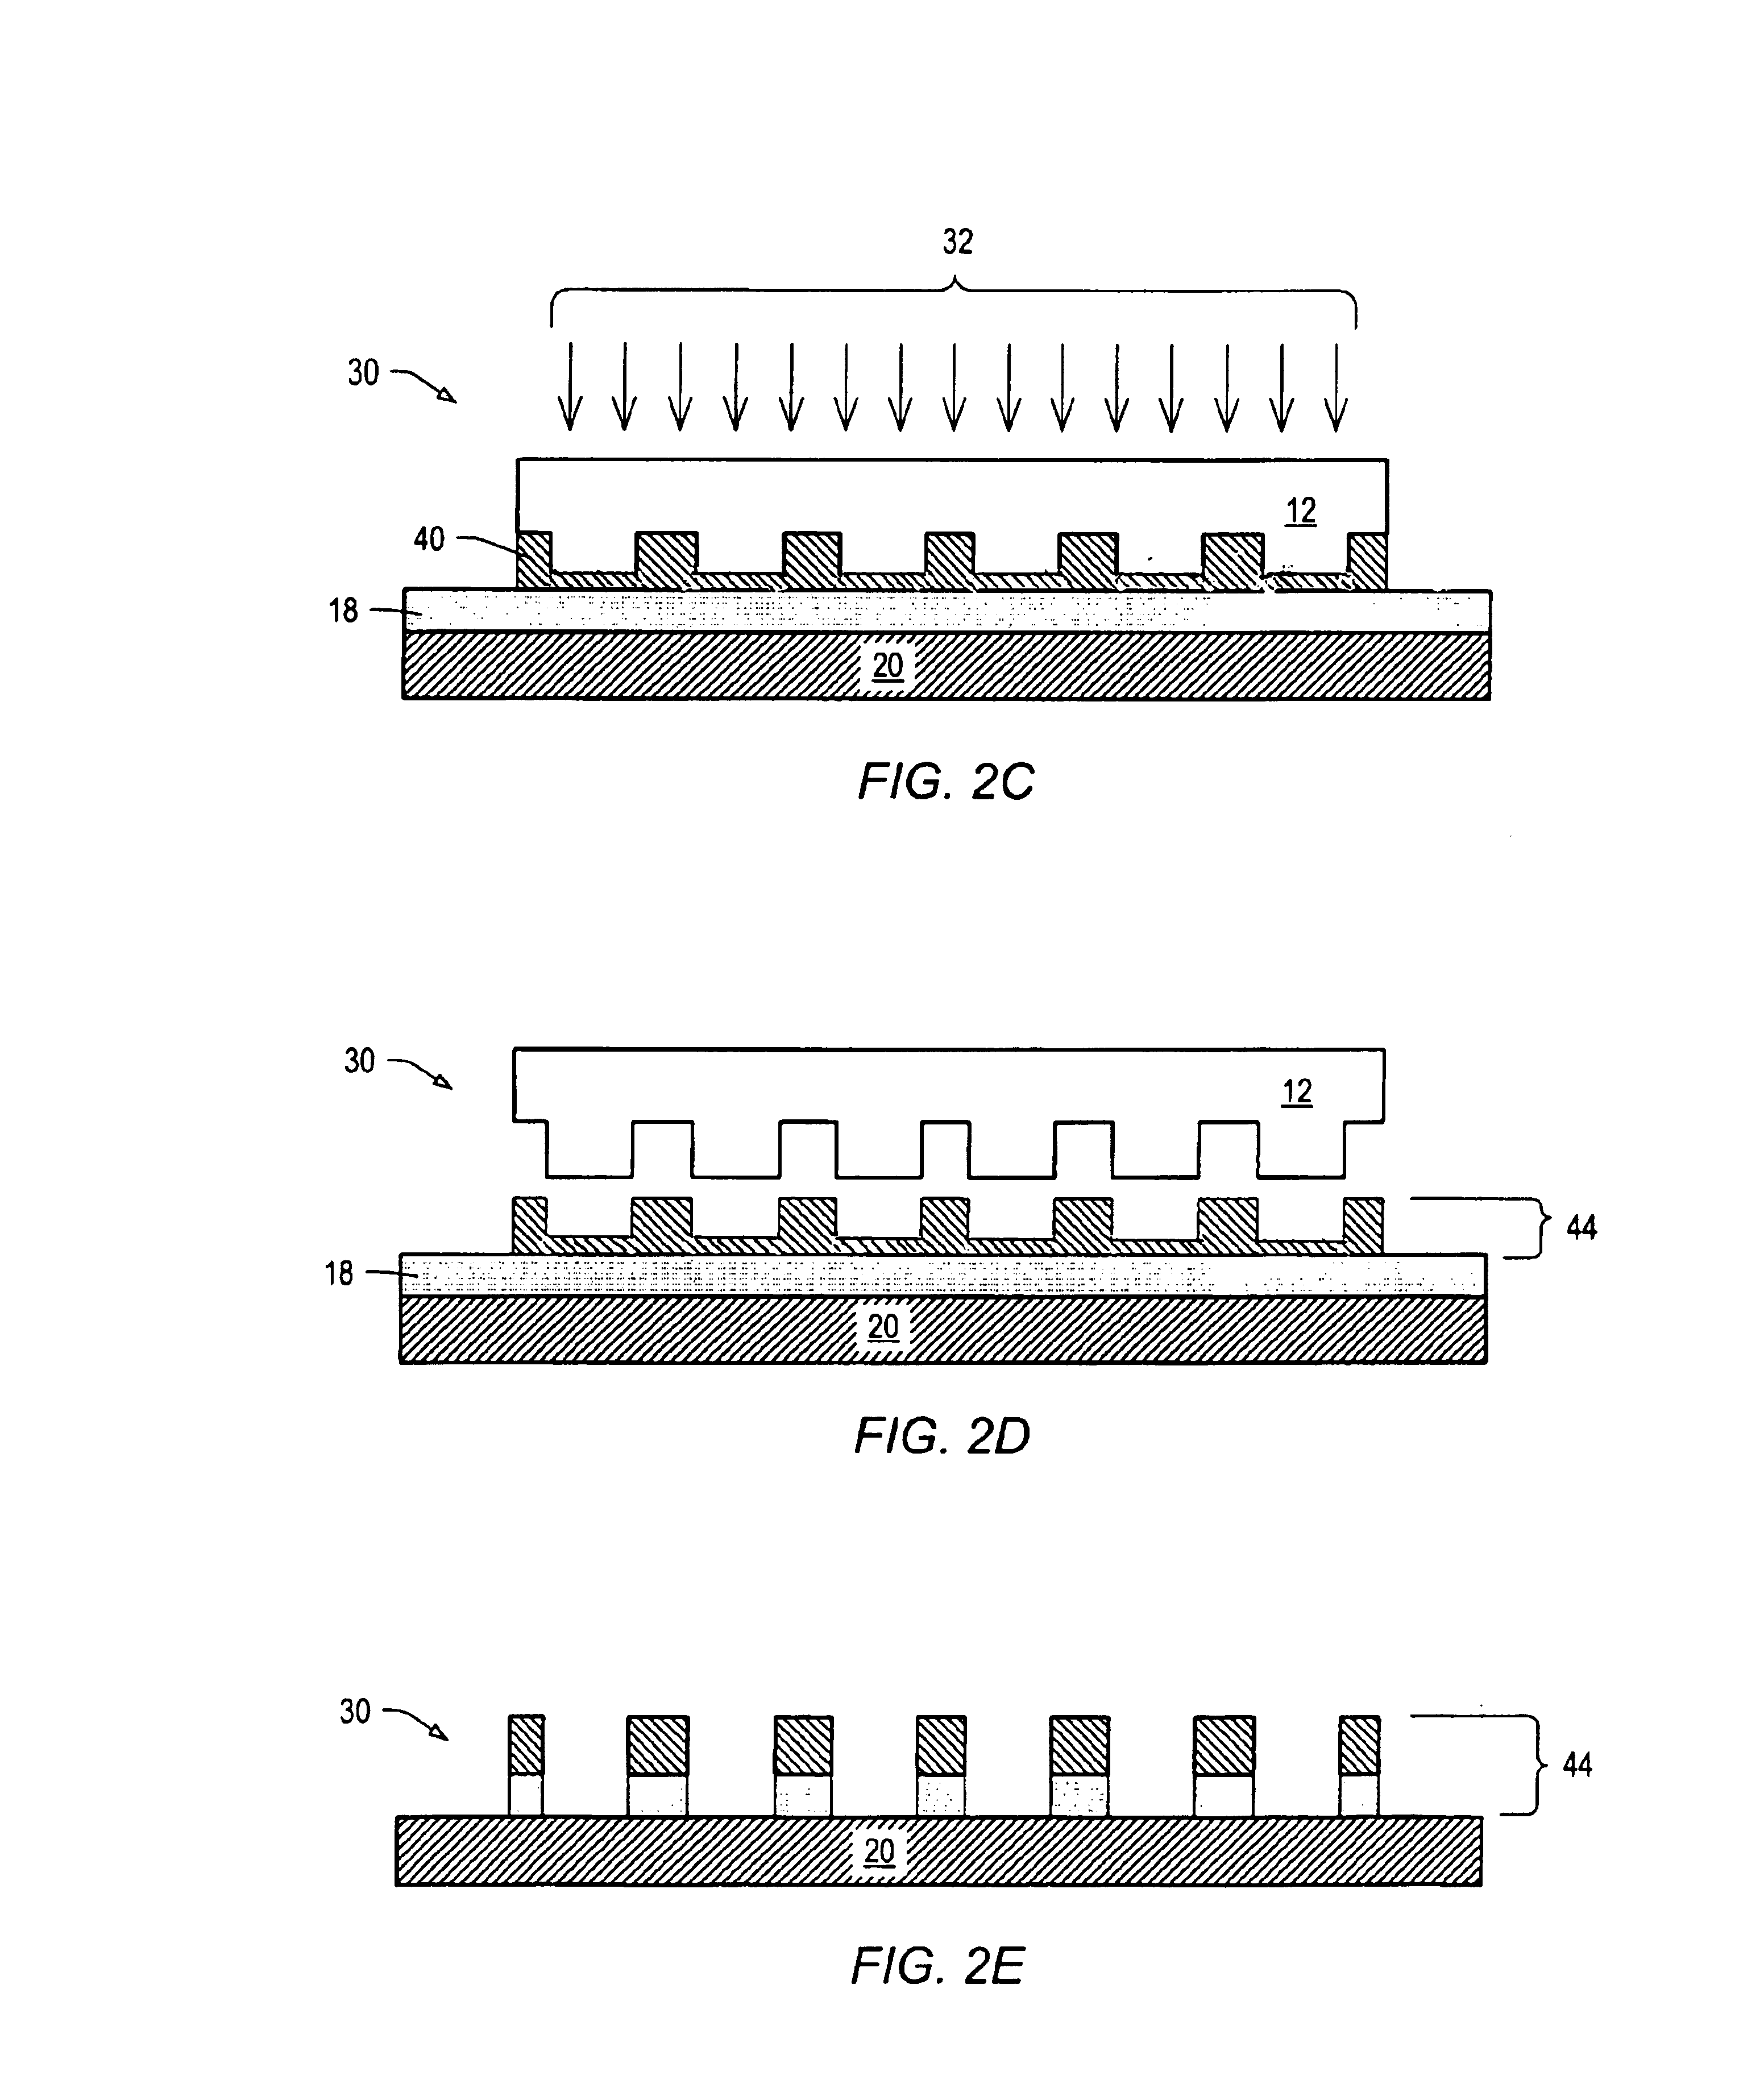 Method of varying template dimensions to achieve alignment during imprint lithography